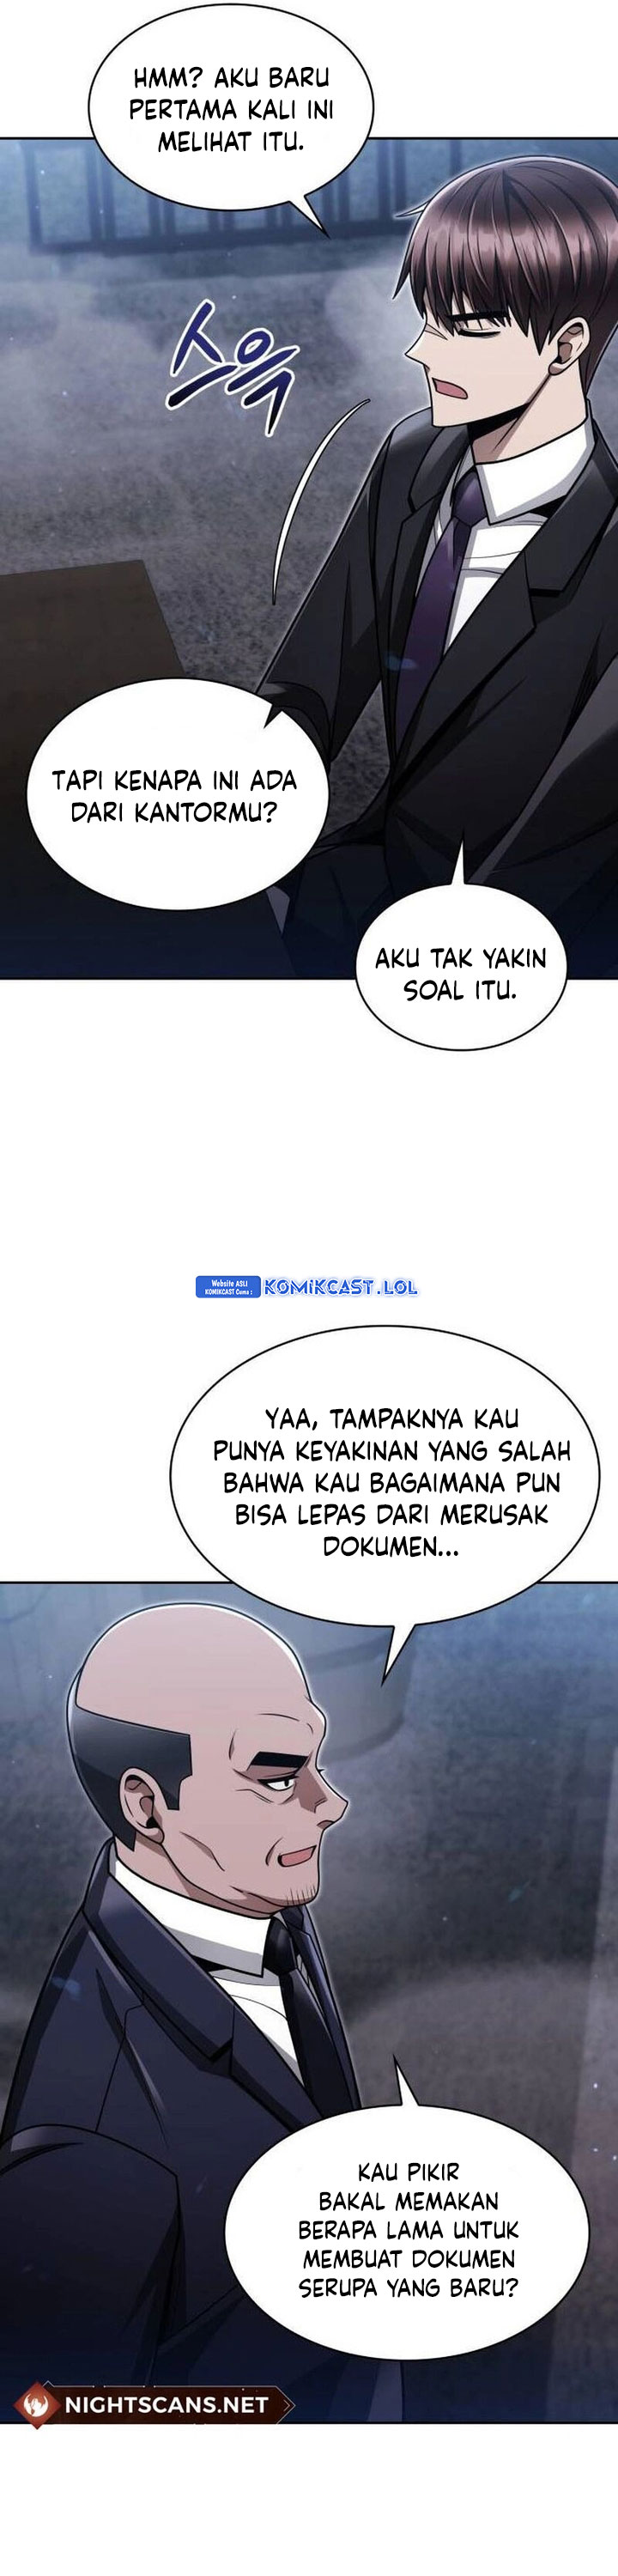 Dilarang COPAS - situs resmi www.mangacanblog.com - Komik clever cleaning life of the returned genius hunter 063 - chapter 63 64 Indonesia clever cleaning life of the returned genius hunter 063 - chapter 63 Terbaru 27|Baca Manga Komik Indonesia|Mangacan